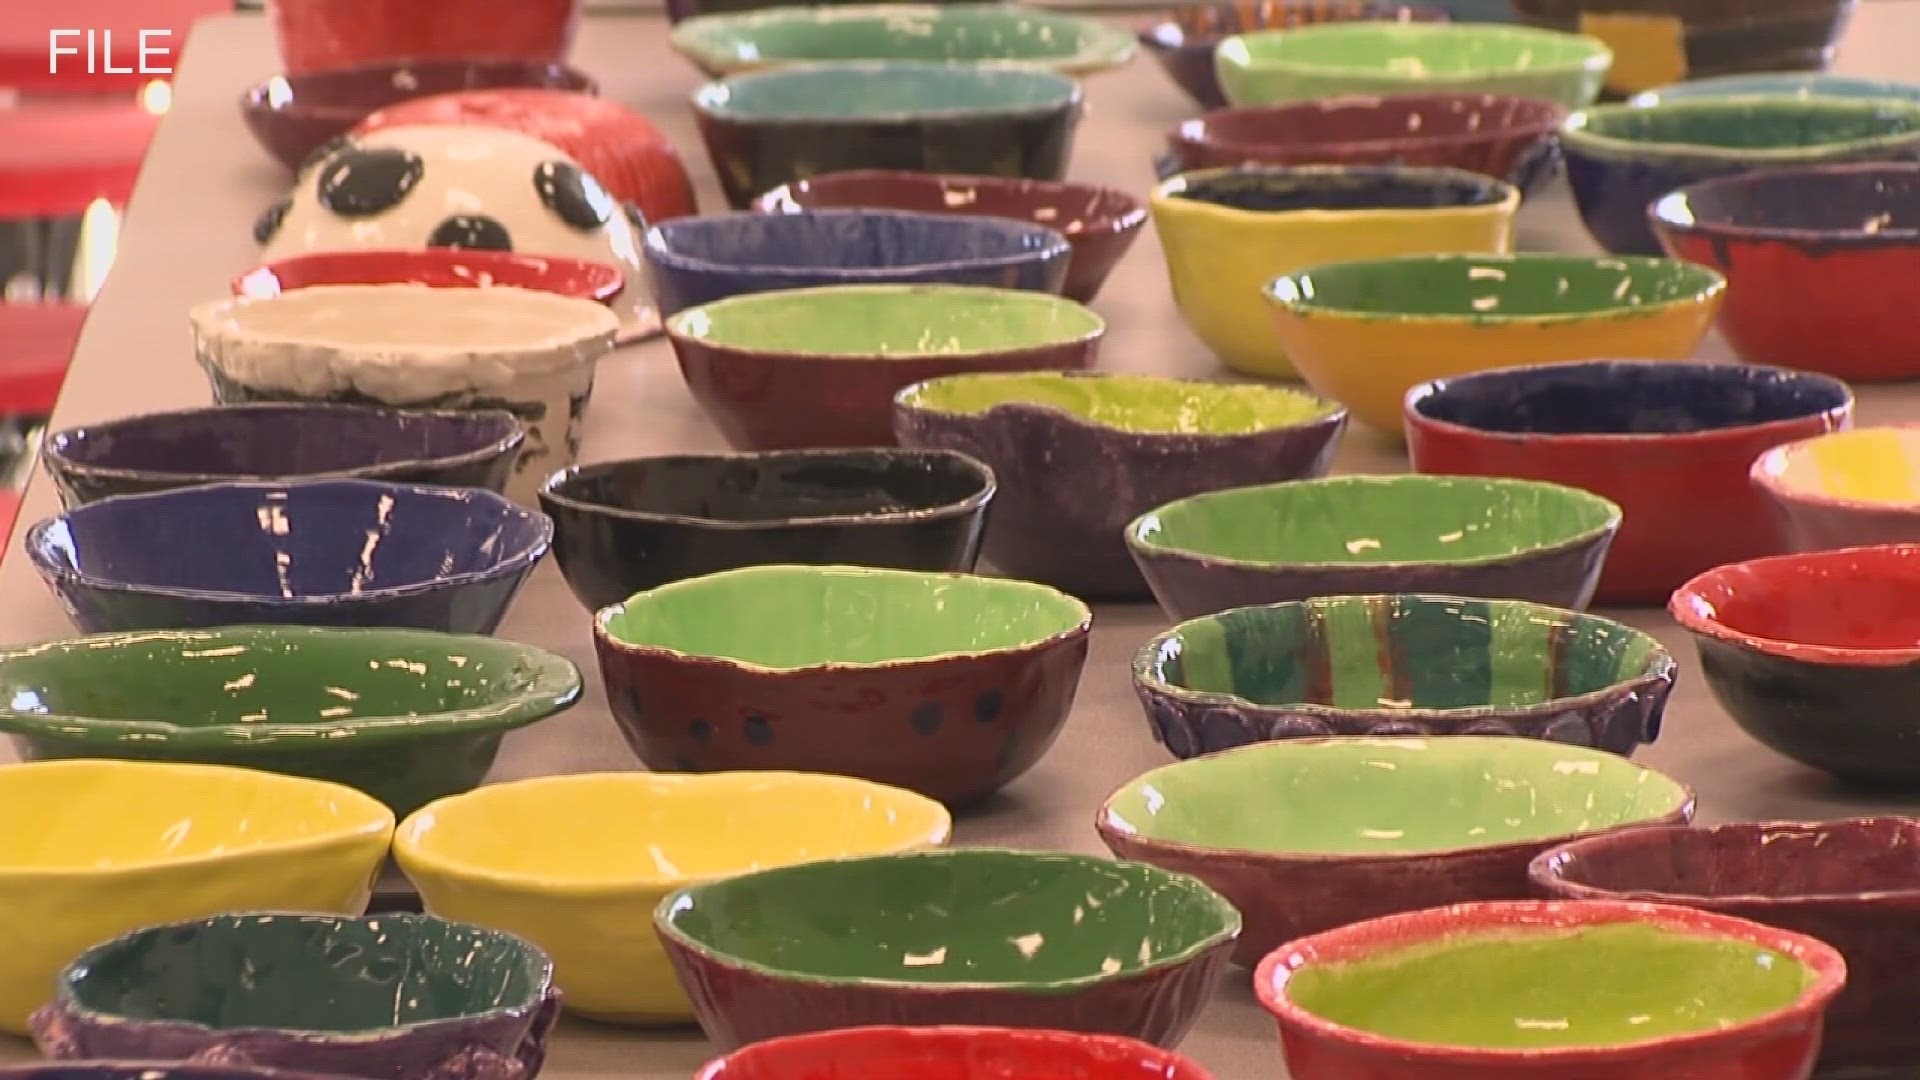 This marks the 24th annual "Empty Bowls" event that raises money for West Texas Food Bank. At least 1,000 hand-made bowls will go up for sale at Odessa College.